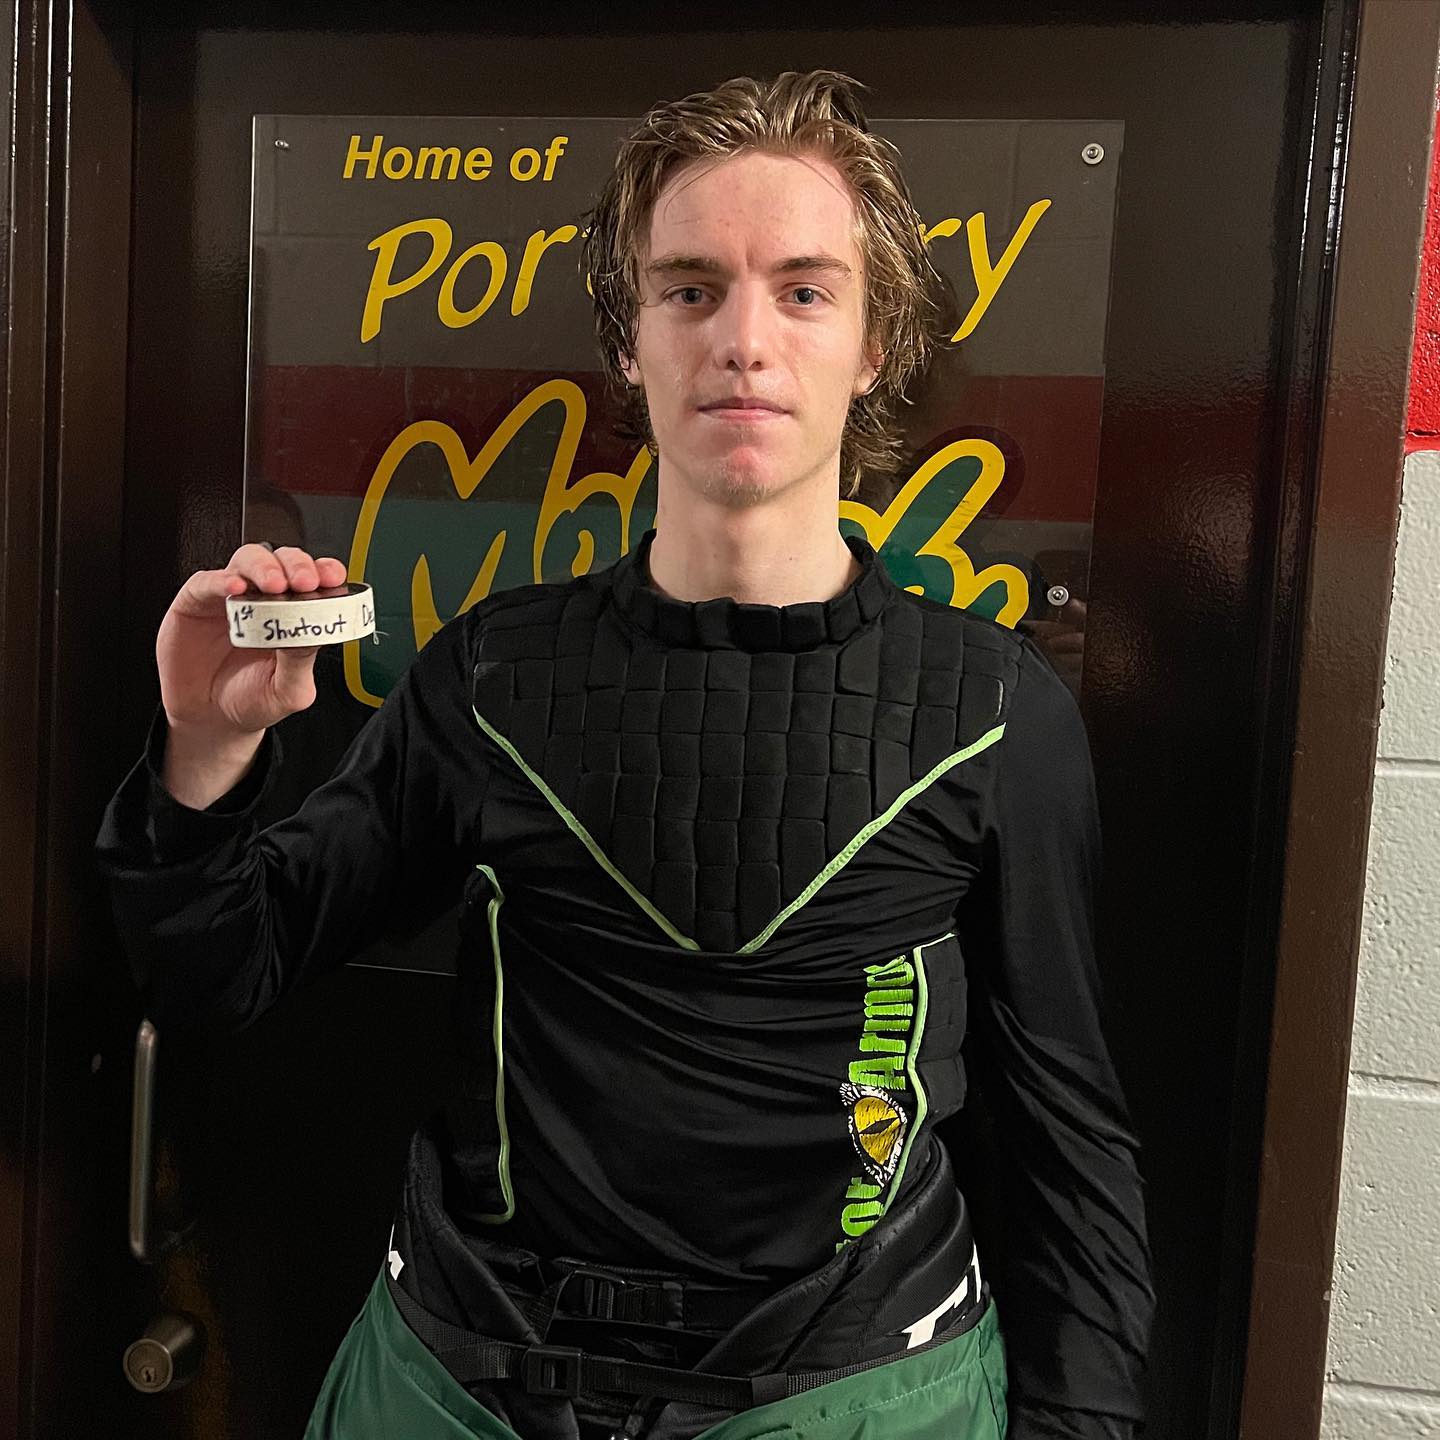 🚨🚨FIRST CAREER SHUTOUT🚨🚨

#30 Gavin Bradt earns his first career shutout in a 1-0 win over the Lakefield Chiefs this afternoon!

Congrats Bradt!